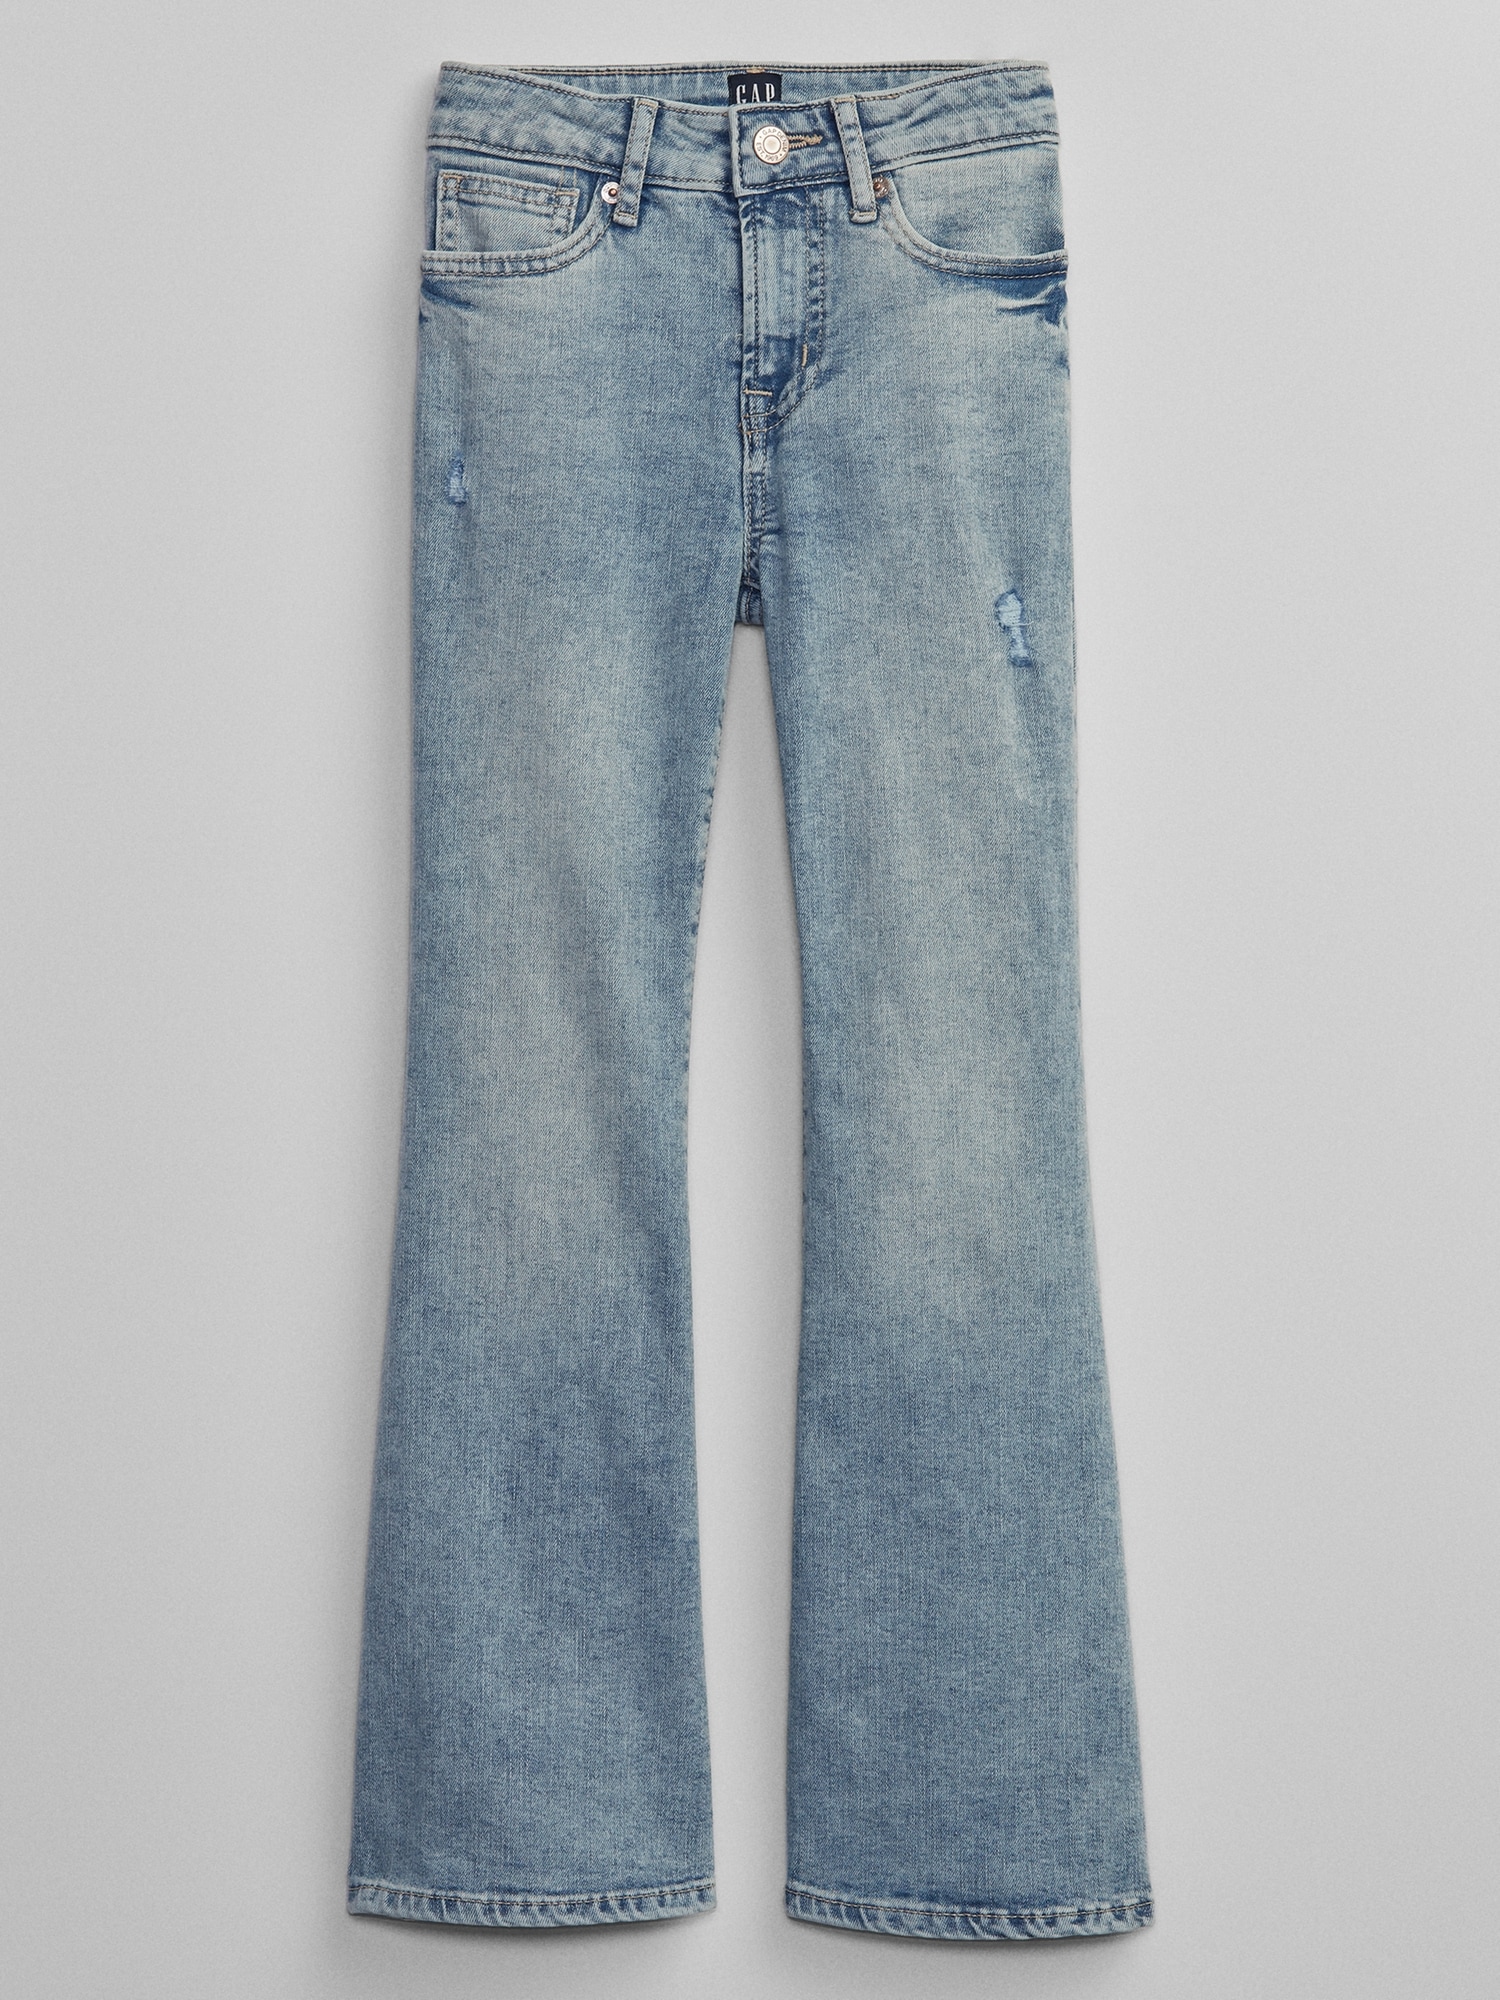 Gap 70s Flare Jeans